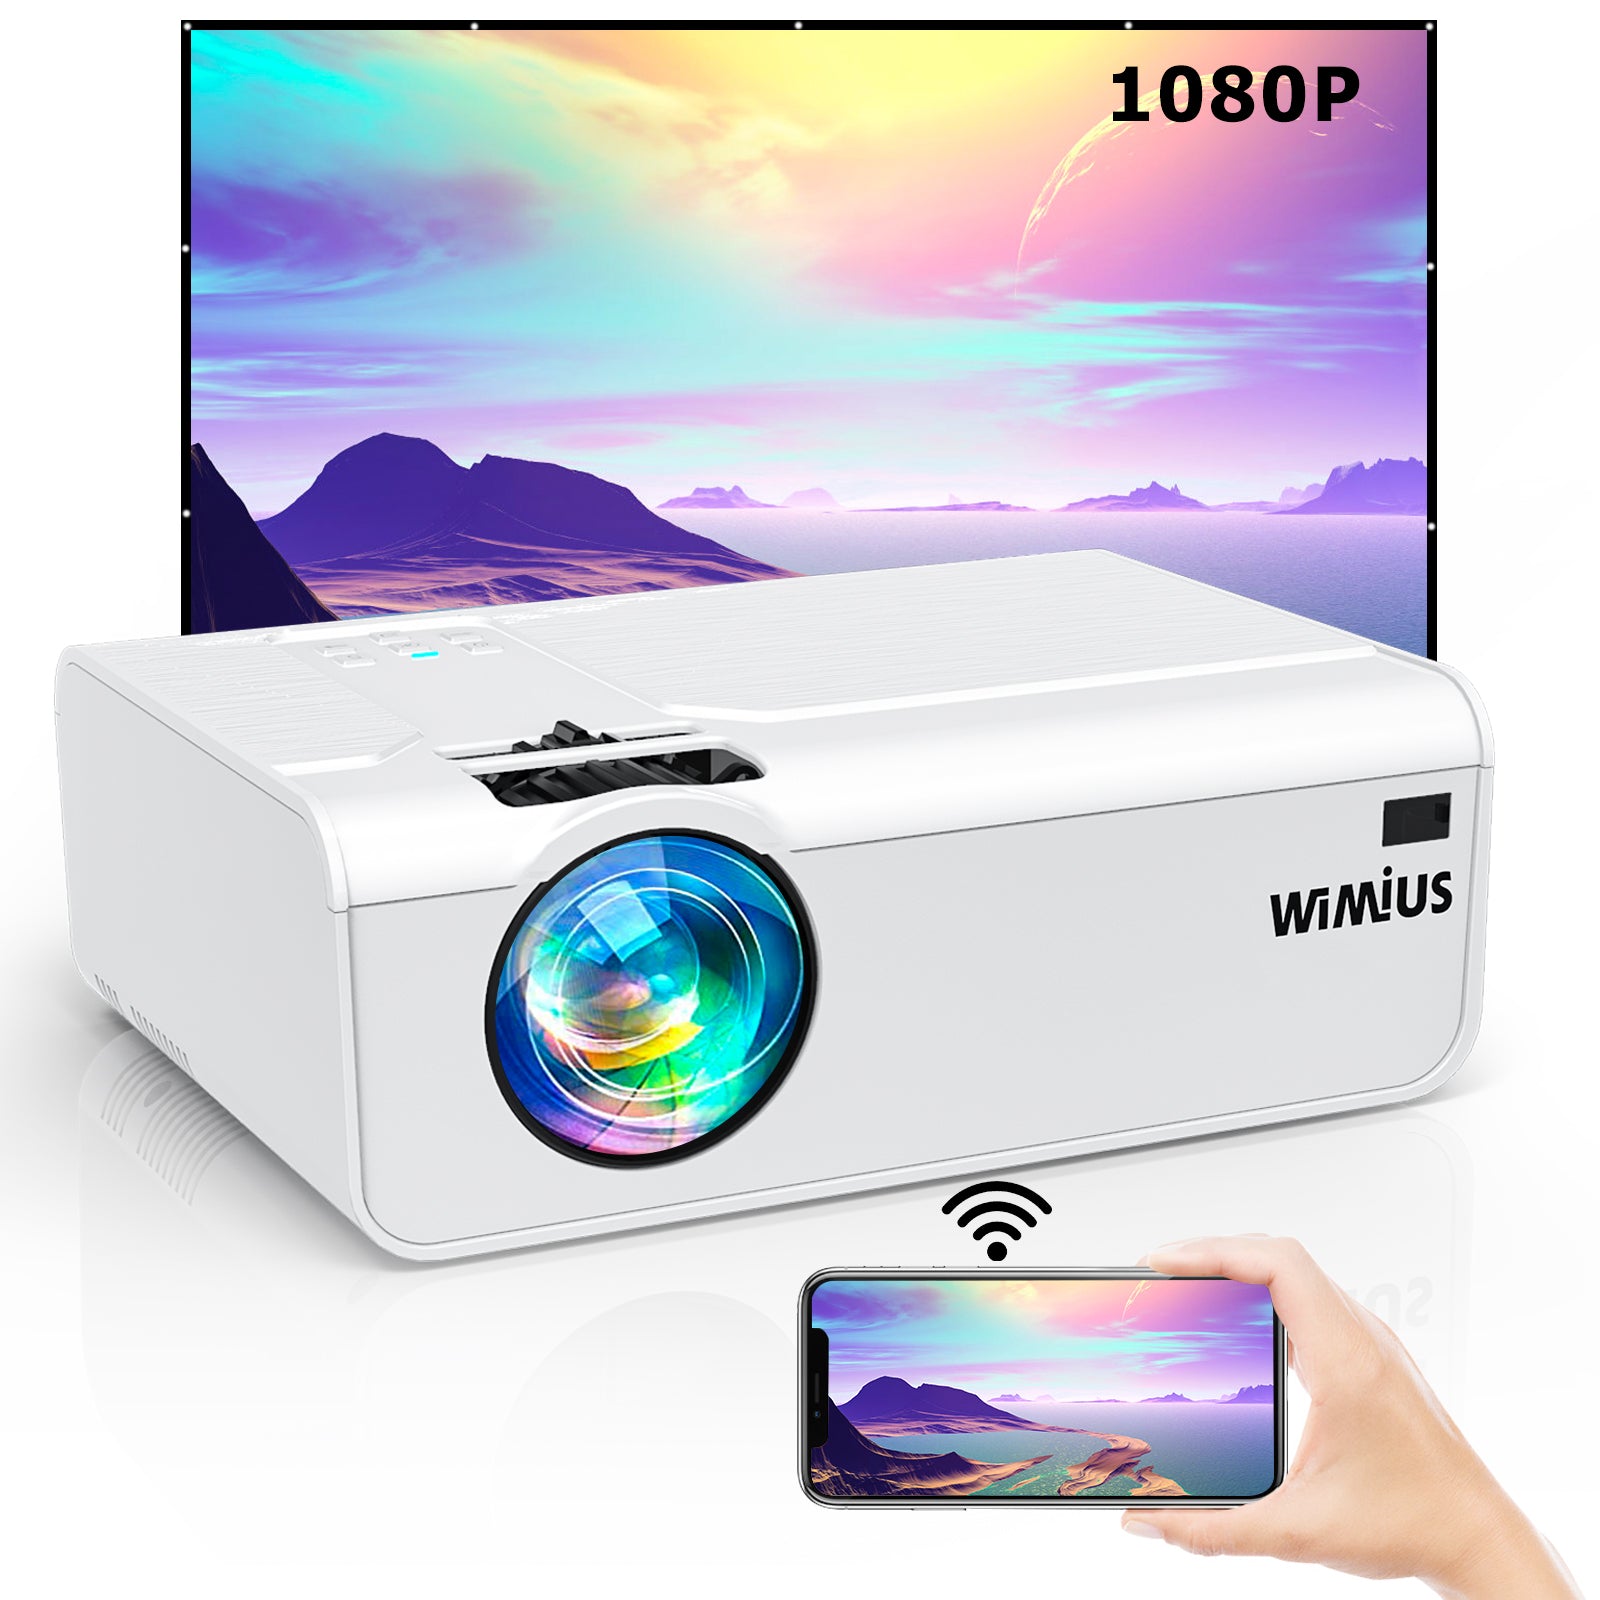 WiFi Projector Support 5.0 Bluetooth Transmitter, WiMiUS K2 Mini Projector Native 1080P Support 4K, 300’’ Screen Zoom Compatible with Smartphone (Wirelessly) PC TV Stick